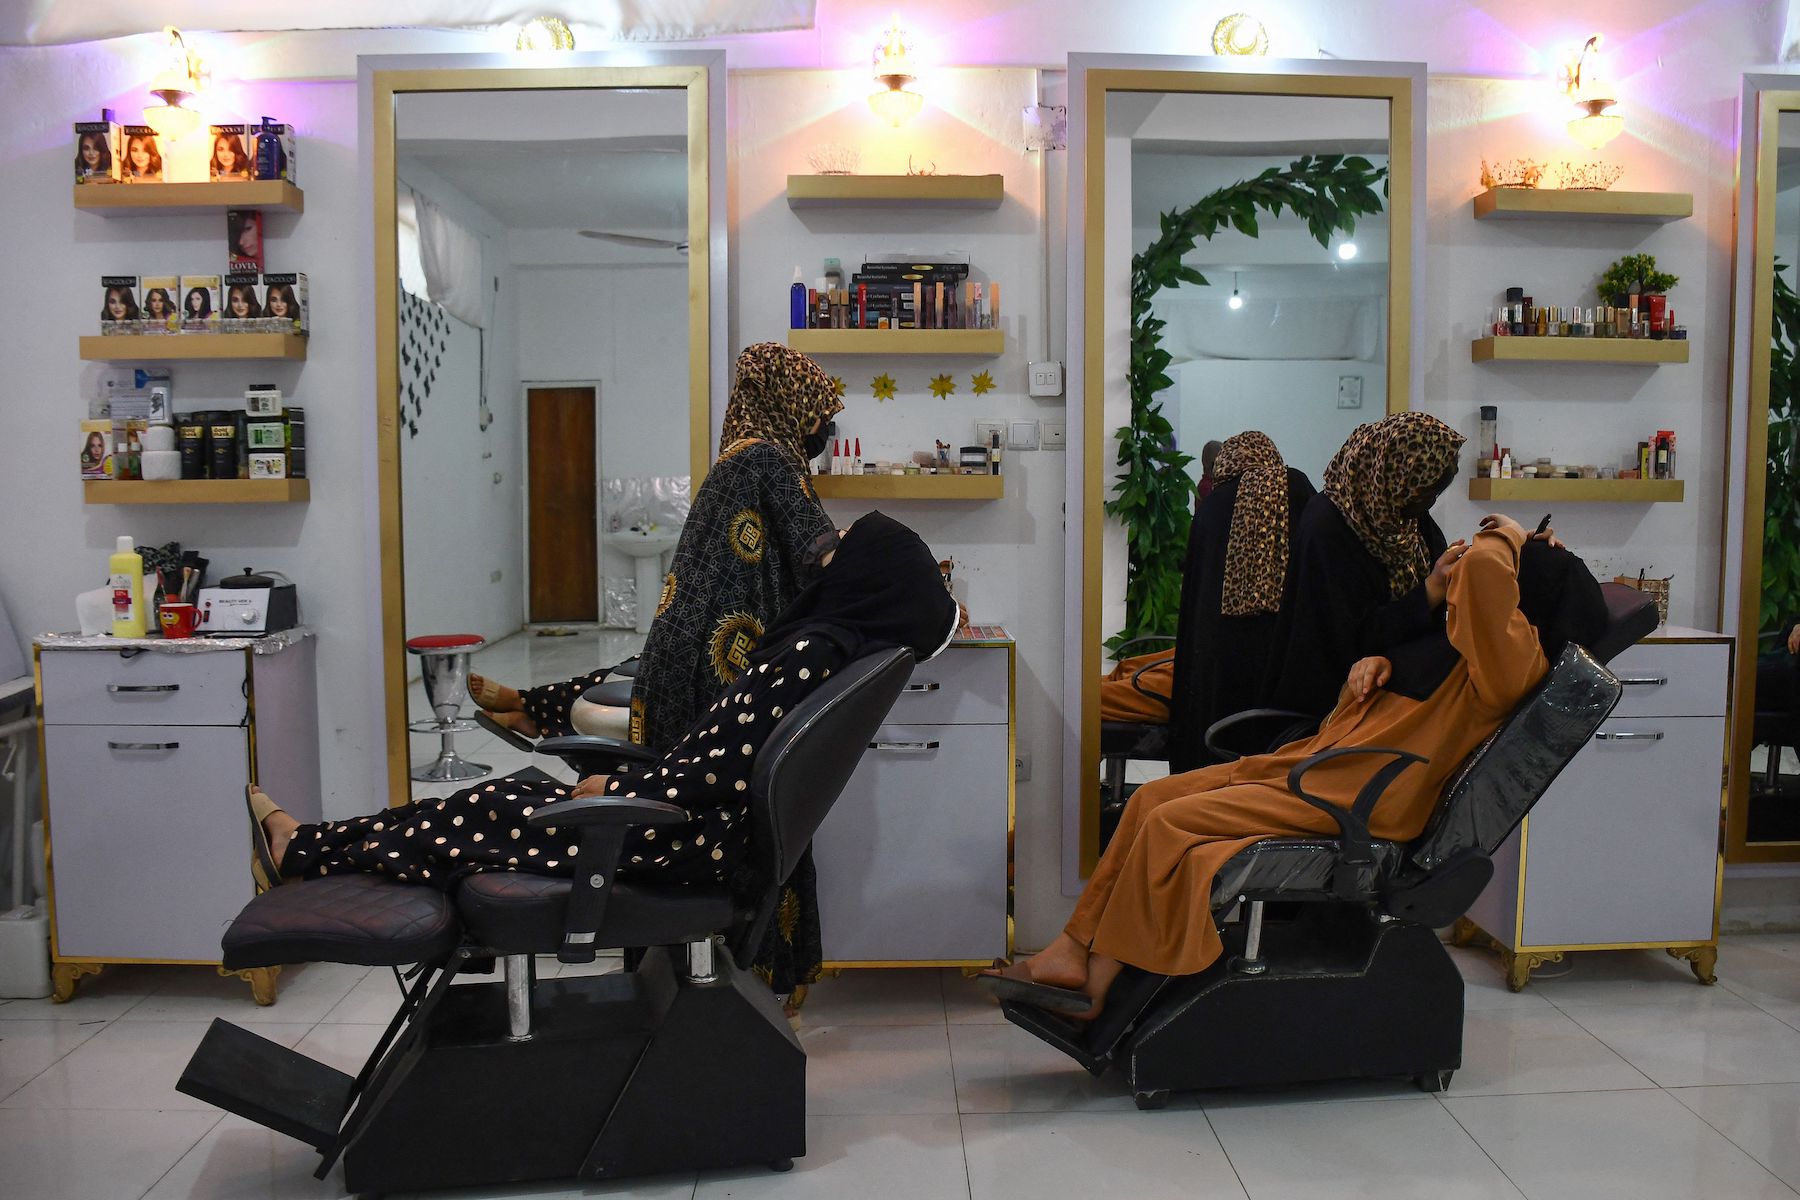 Women In Afghanistan Held A Rare Protest Against The Taliban Banning Beauty Salons